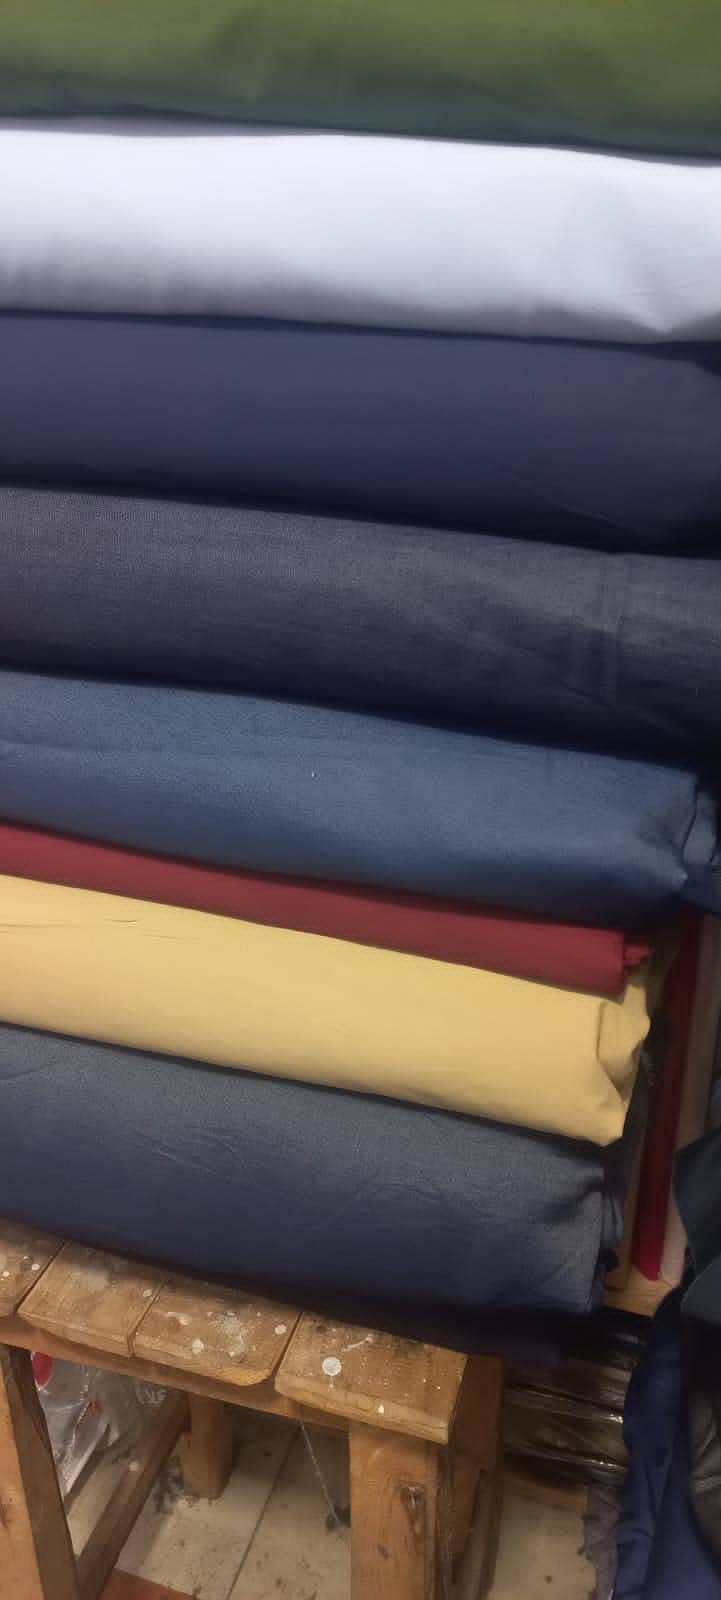 Denim Jeans Fabric Soft and Export Quality 3